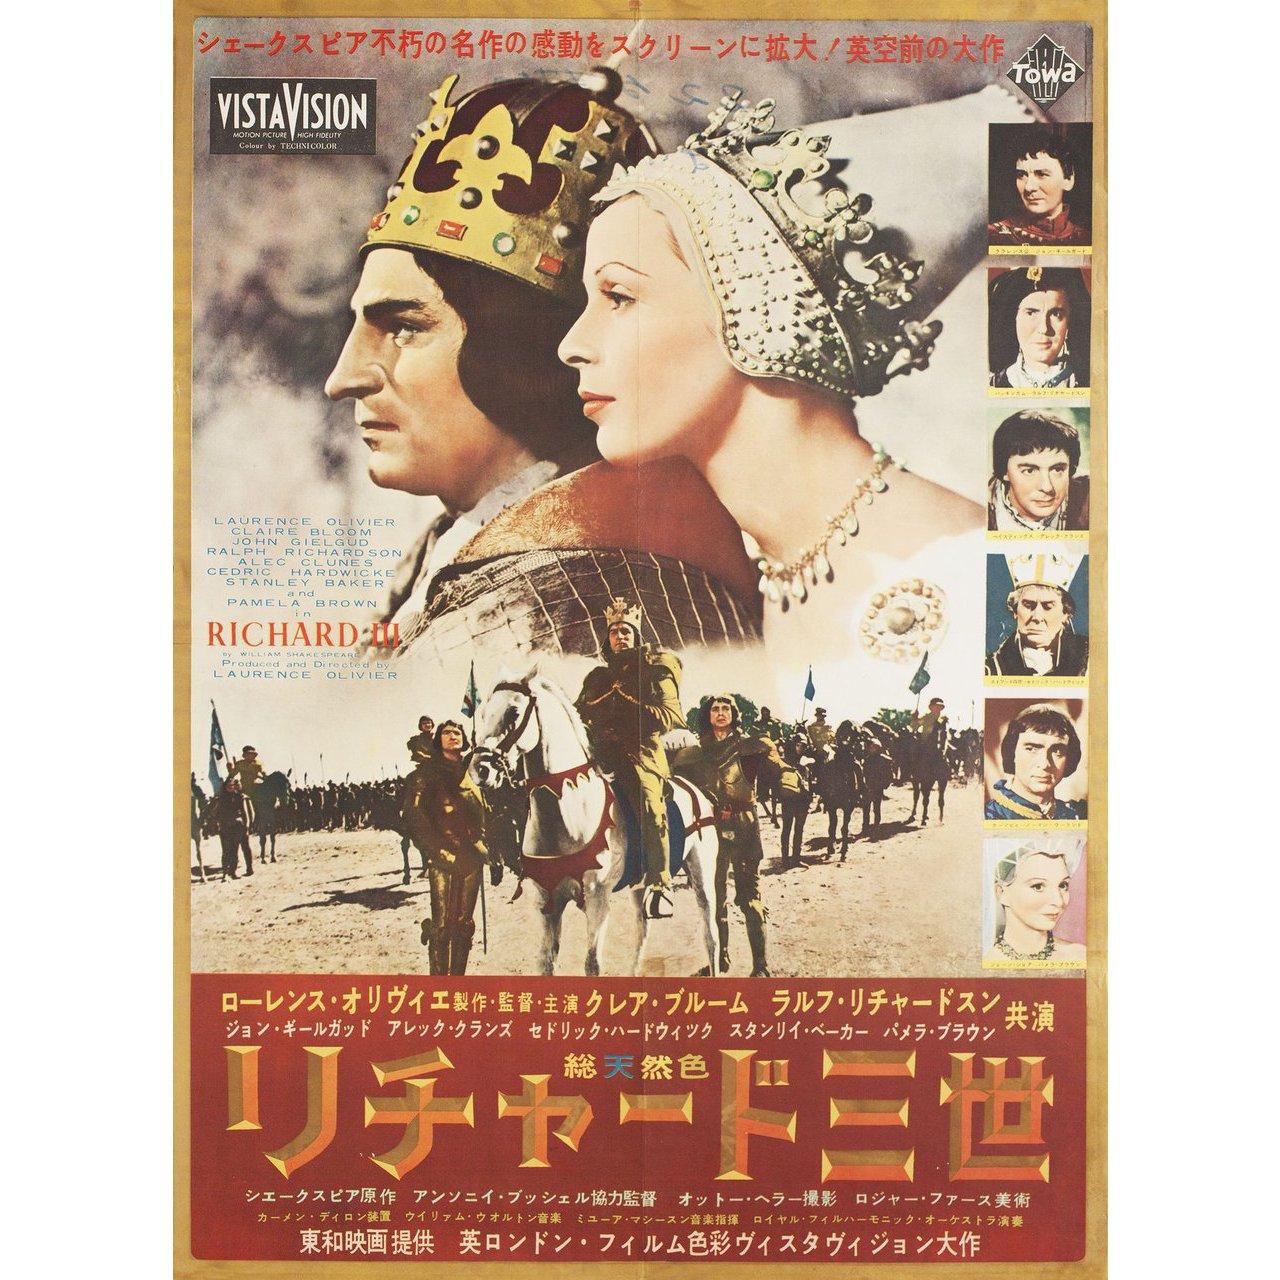 Original 1956 Japanese B2 poster for the first Japanese theatrical release of the film Richard III directed by Laurence Olivier with Cedric Hardwicke / Nicholas Hannen / Laurence Olivier / Ralph Richardson. Very Good condition, folded with bleed